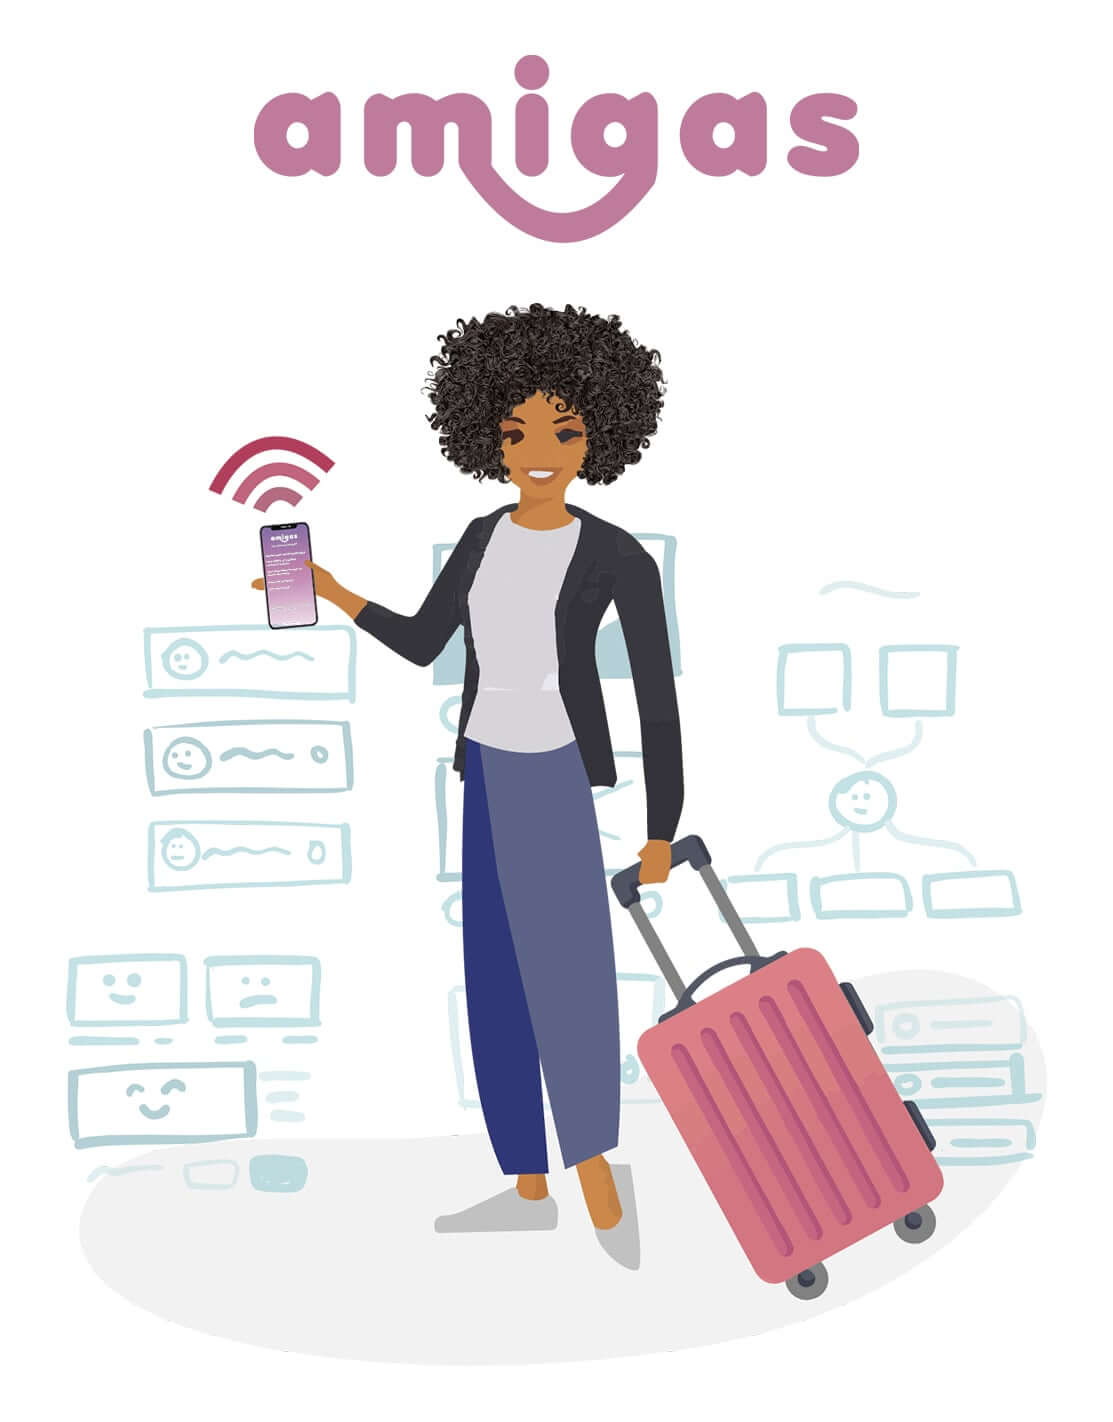 Amigas travel app final thoughts